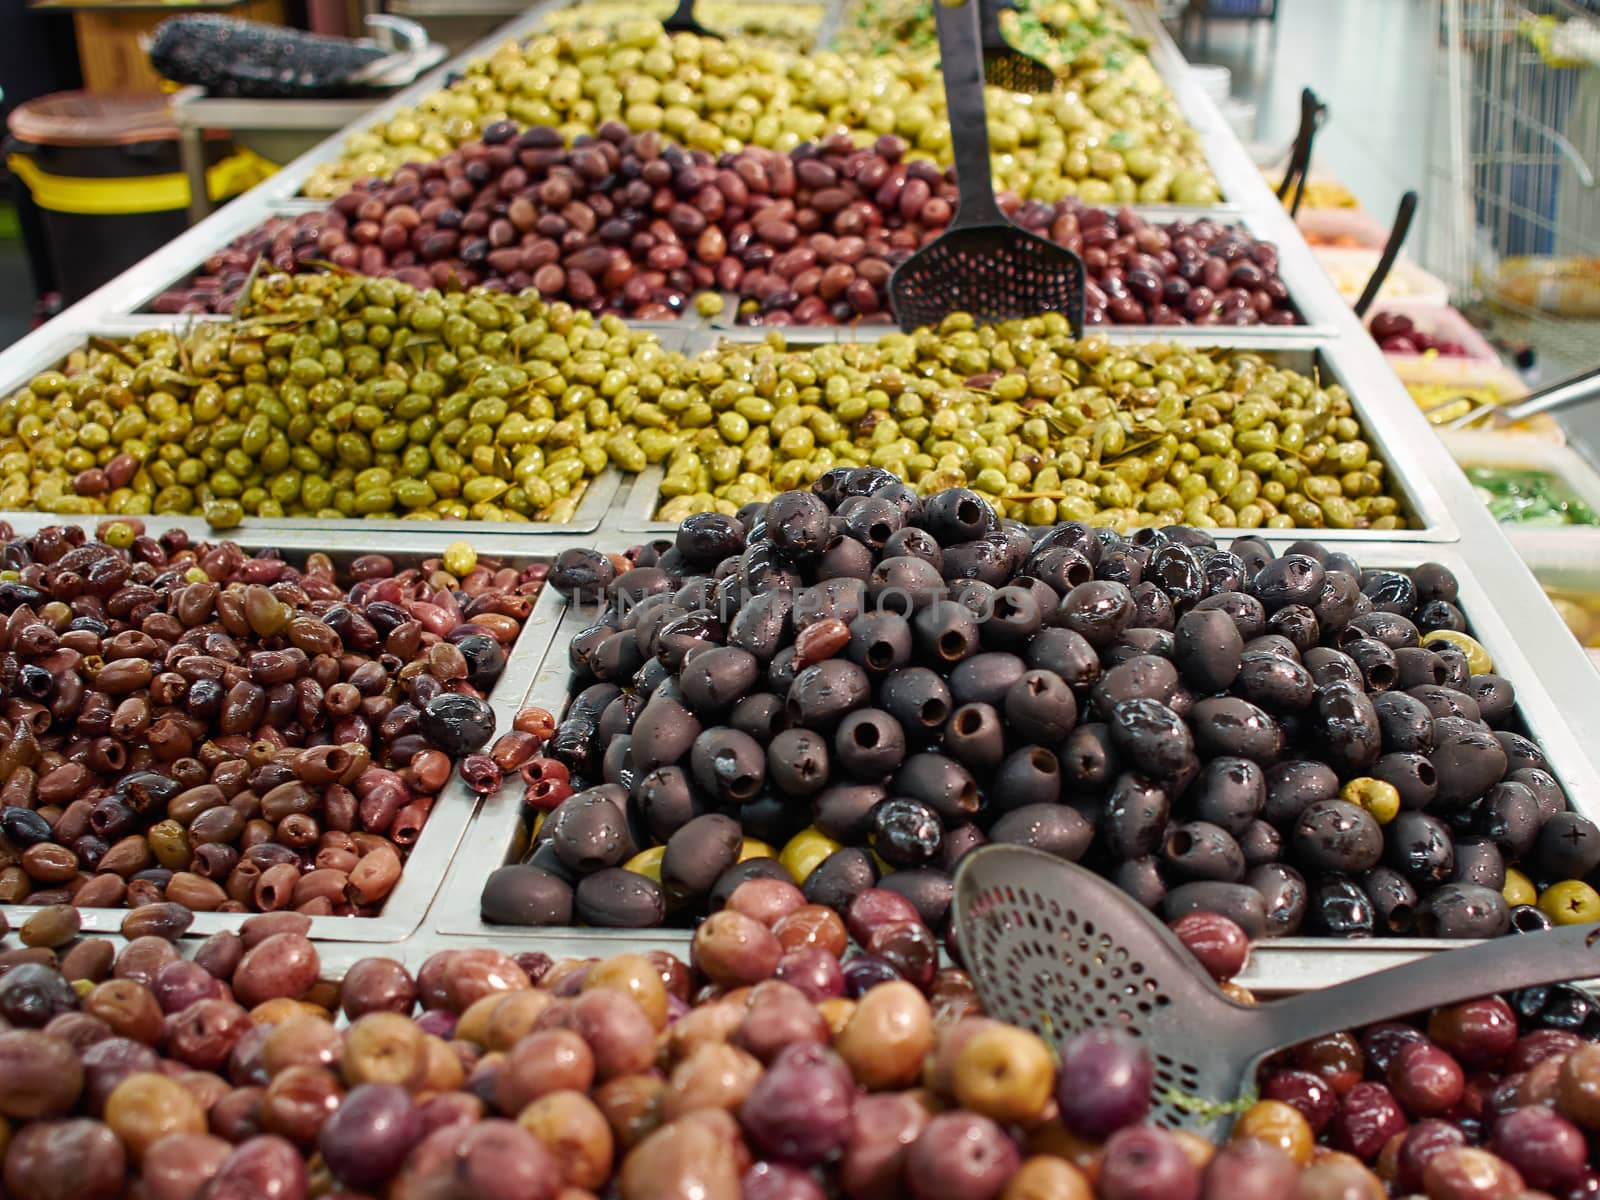 Selection of olives for sale by Ronyzmbow